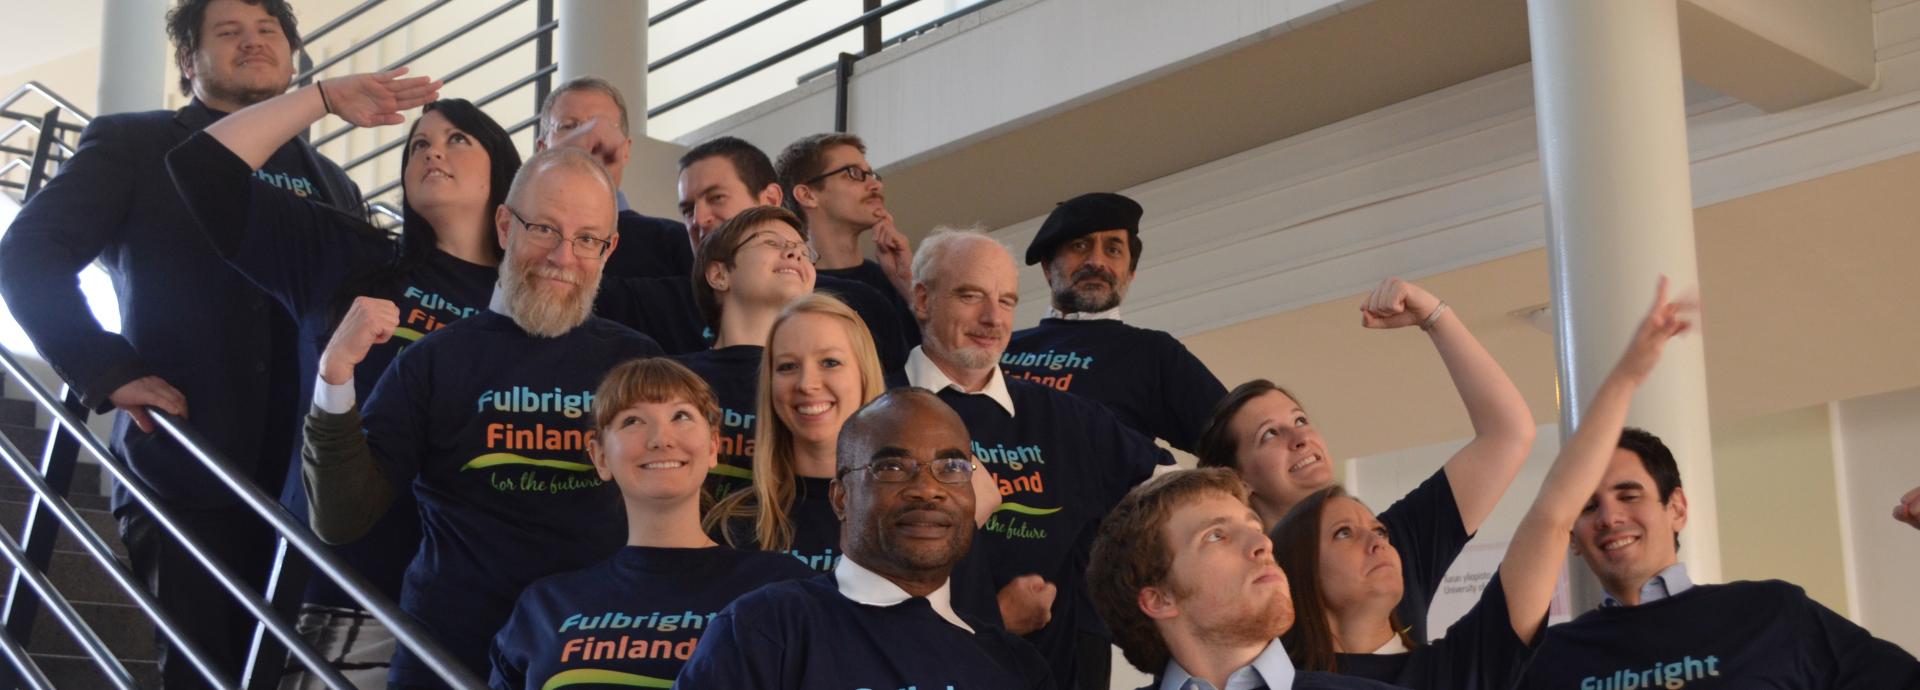 Group of American Fulbrighters wearing Fulbright Finland t-shirts on a staircase making superhero-like moves